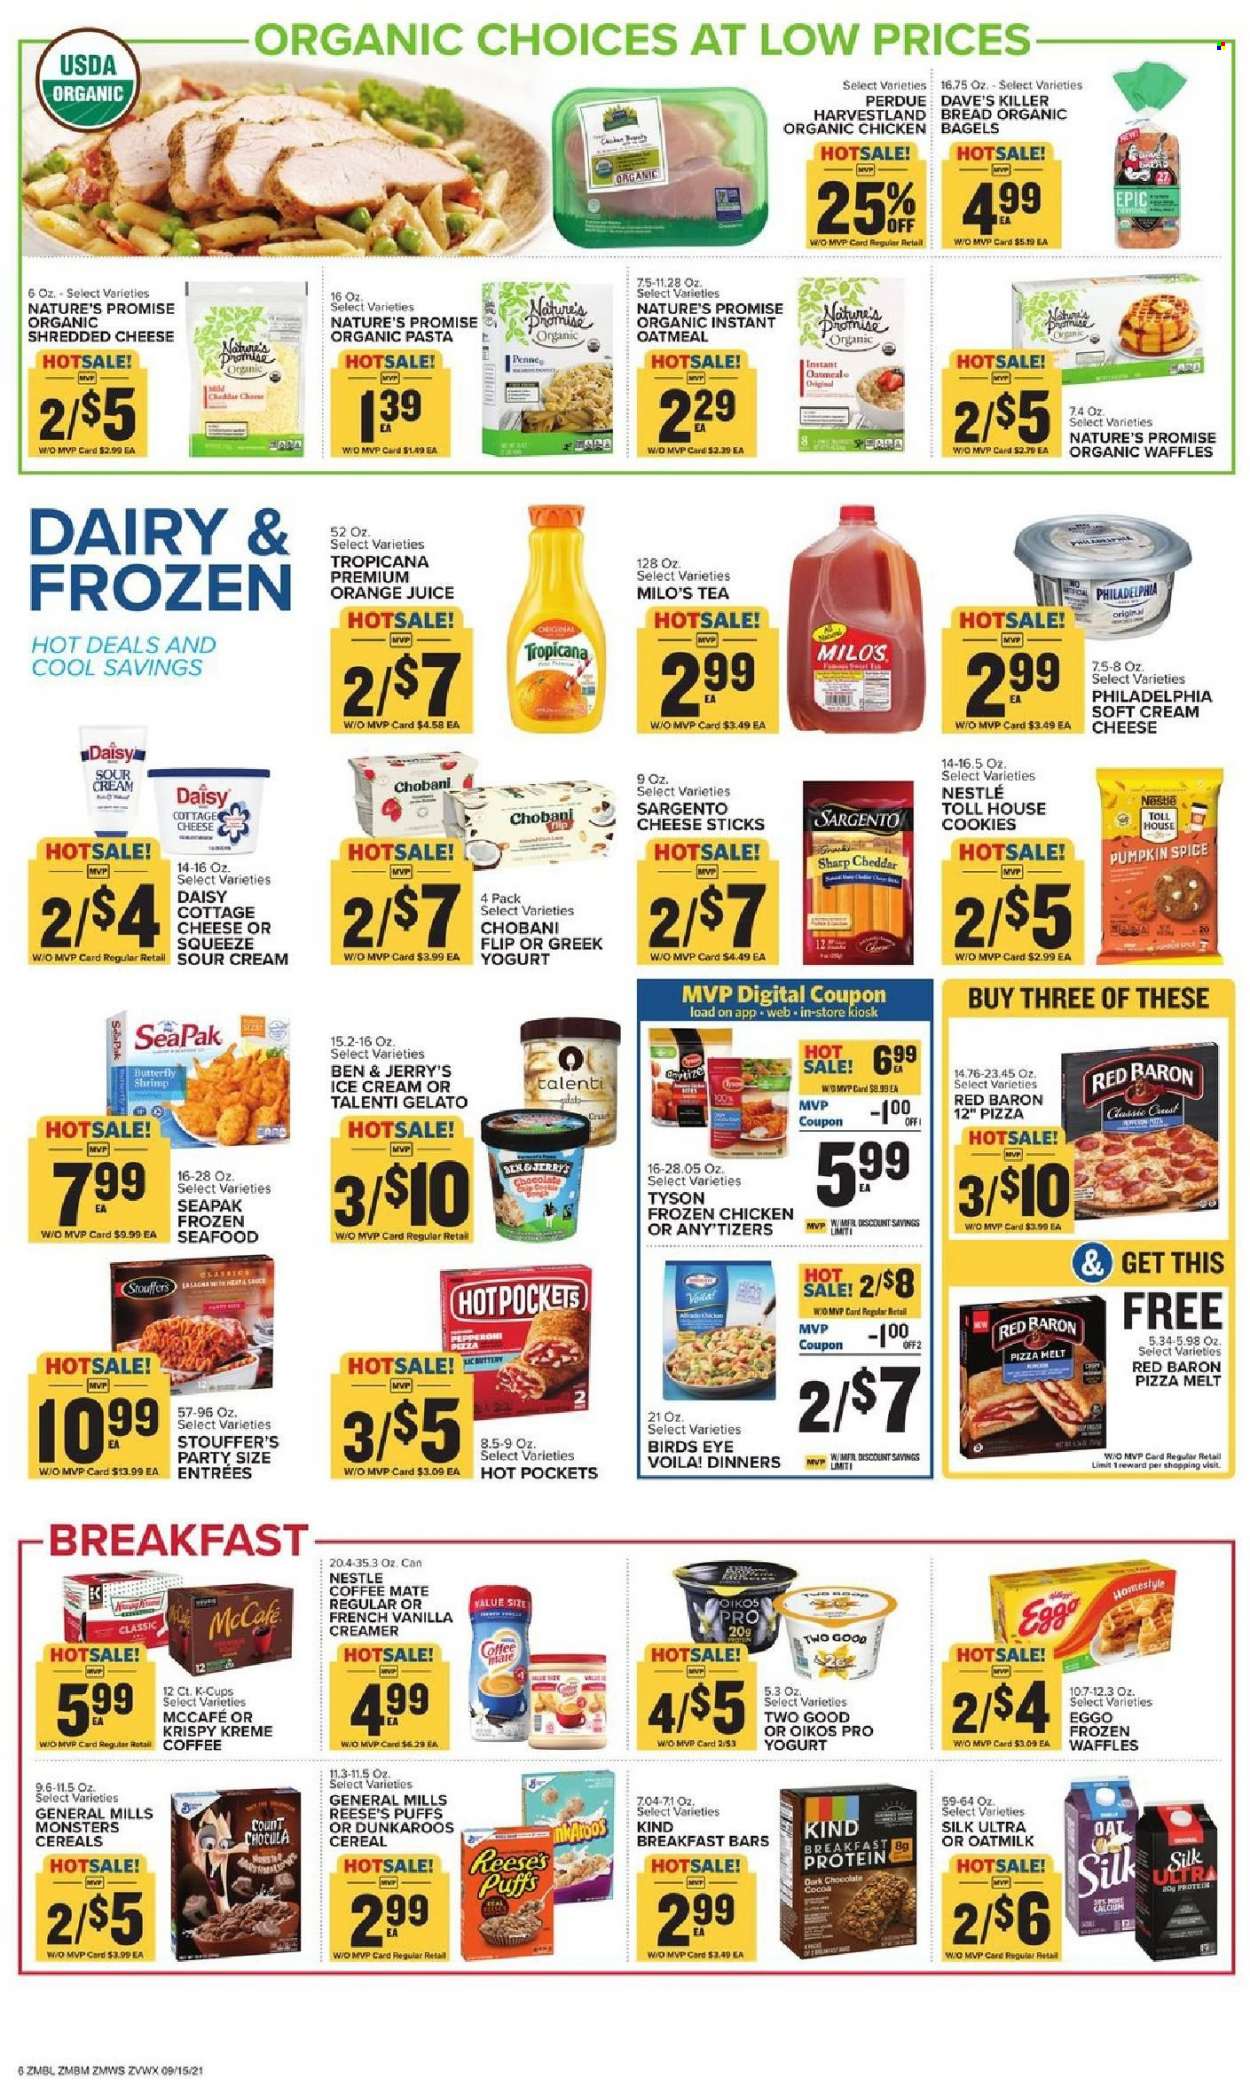 thumbnail - Food Lion Flyer - 09/15/2021 - 09/21/2021 - Sales products - bagels, bread, Nature’s Promise, puffs, waffles, seafood, shrimps, pizza, pasta, Bird's Eye, Perdue®, cottage cheese, shredded cheese, Philadelphia, cheddar, Sargento, greek yoghurt, yoghurt, Oikos, Chobani, Coffee-Mate, Silk, oat milk, sour cream, creamer, ice cream, Reese's, Ben & Jerry's, Talenti Gelato, gelato, cheese sticks, Stouffer's, Red Baron, Nestlé, cocoa, oatmeal, cereals, penne, spice, orange juice, juice, tea, coffee capsules, McCafe, K-Cups, calcium. Page 6.